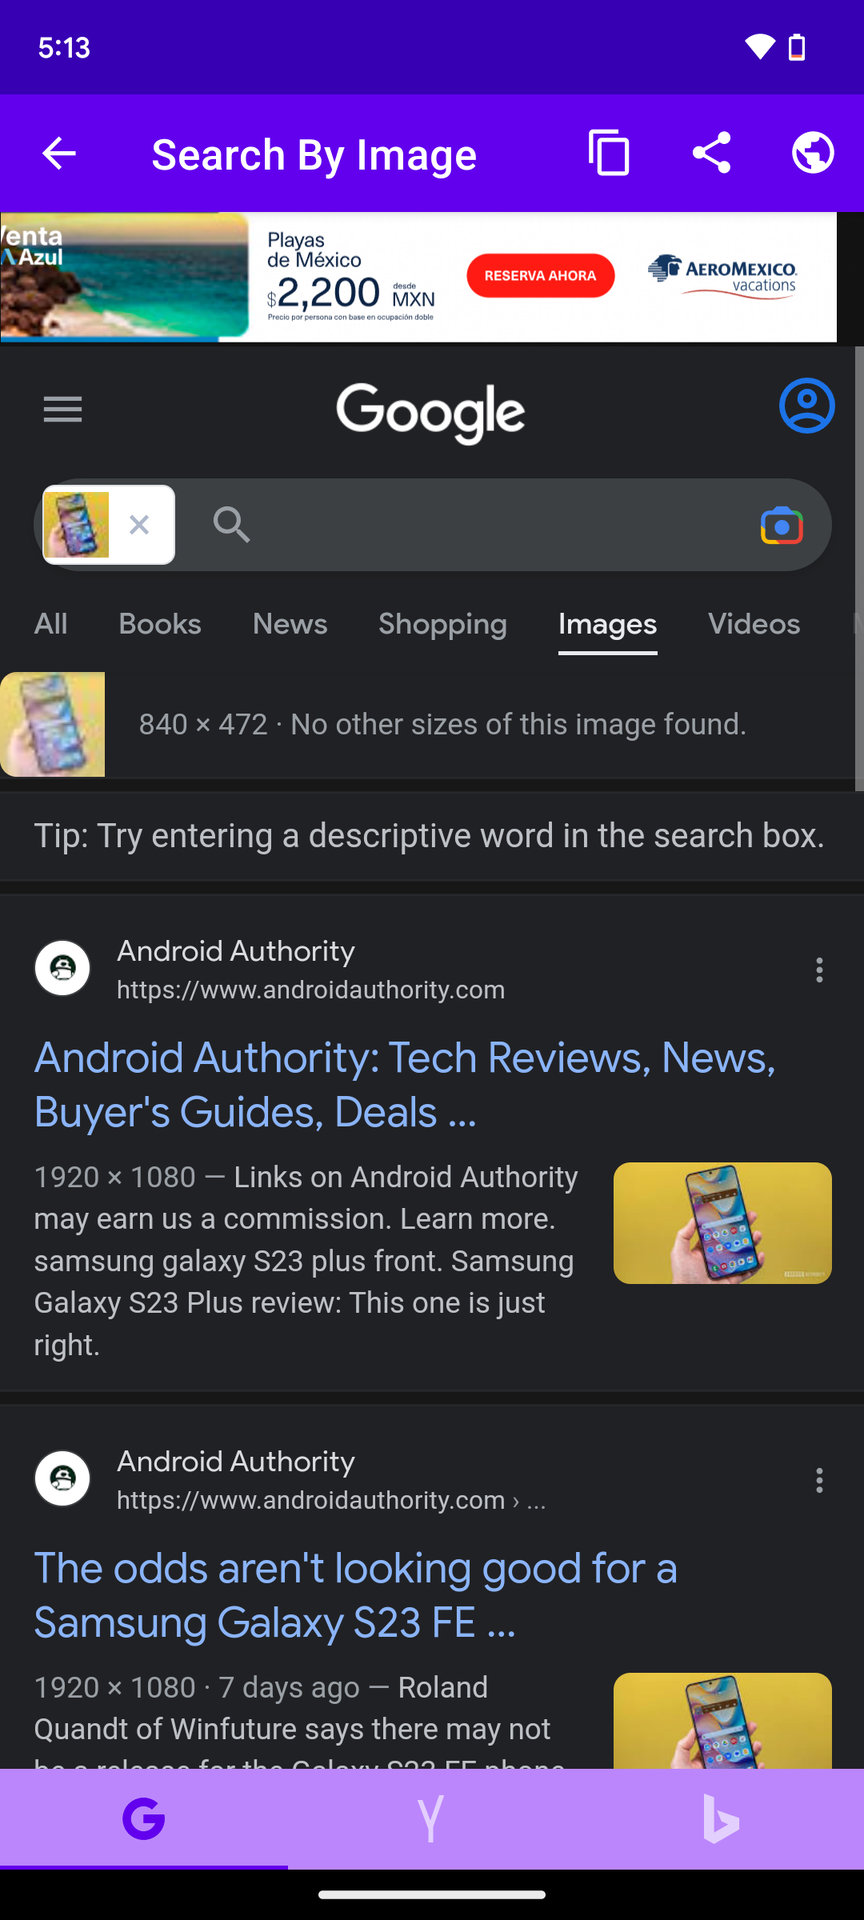 How to use the Search by Image app 5